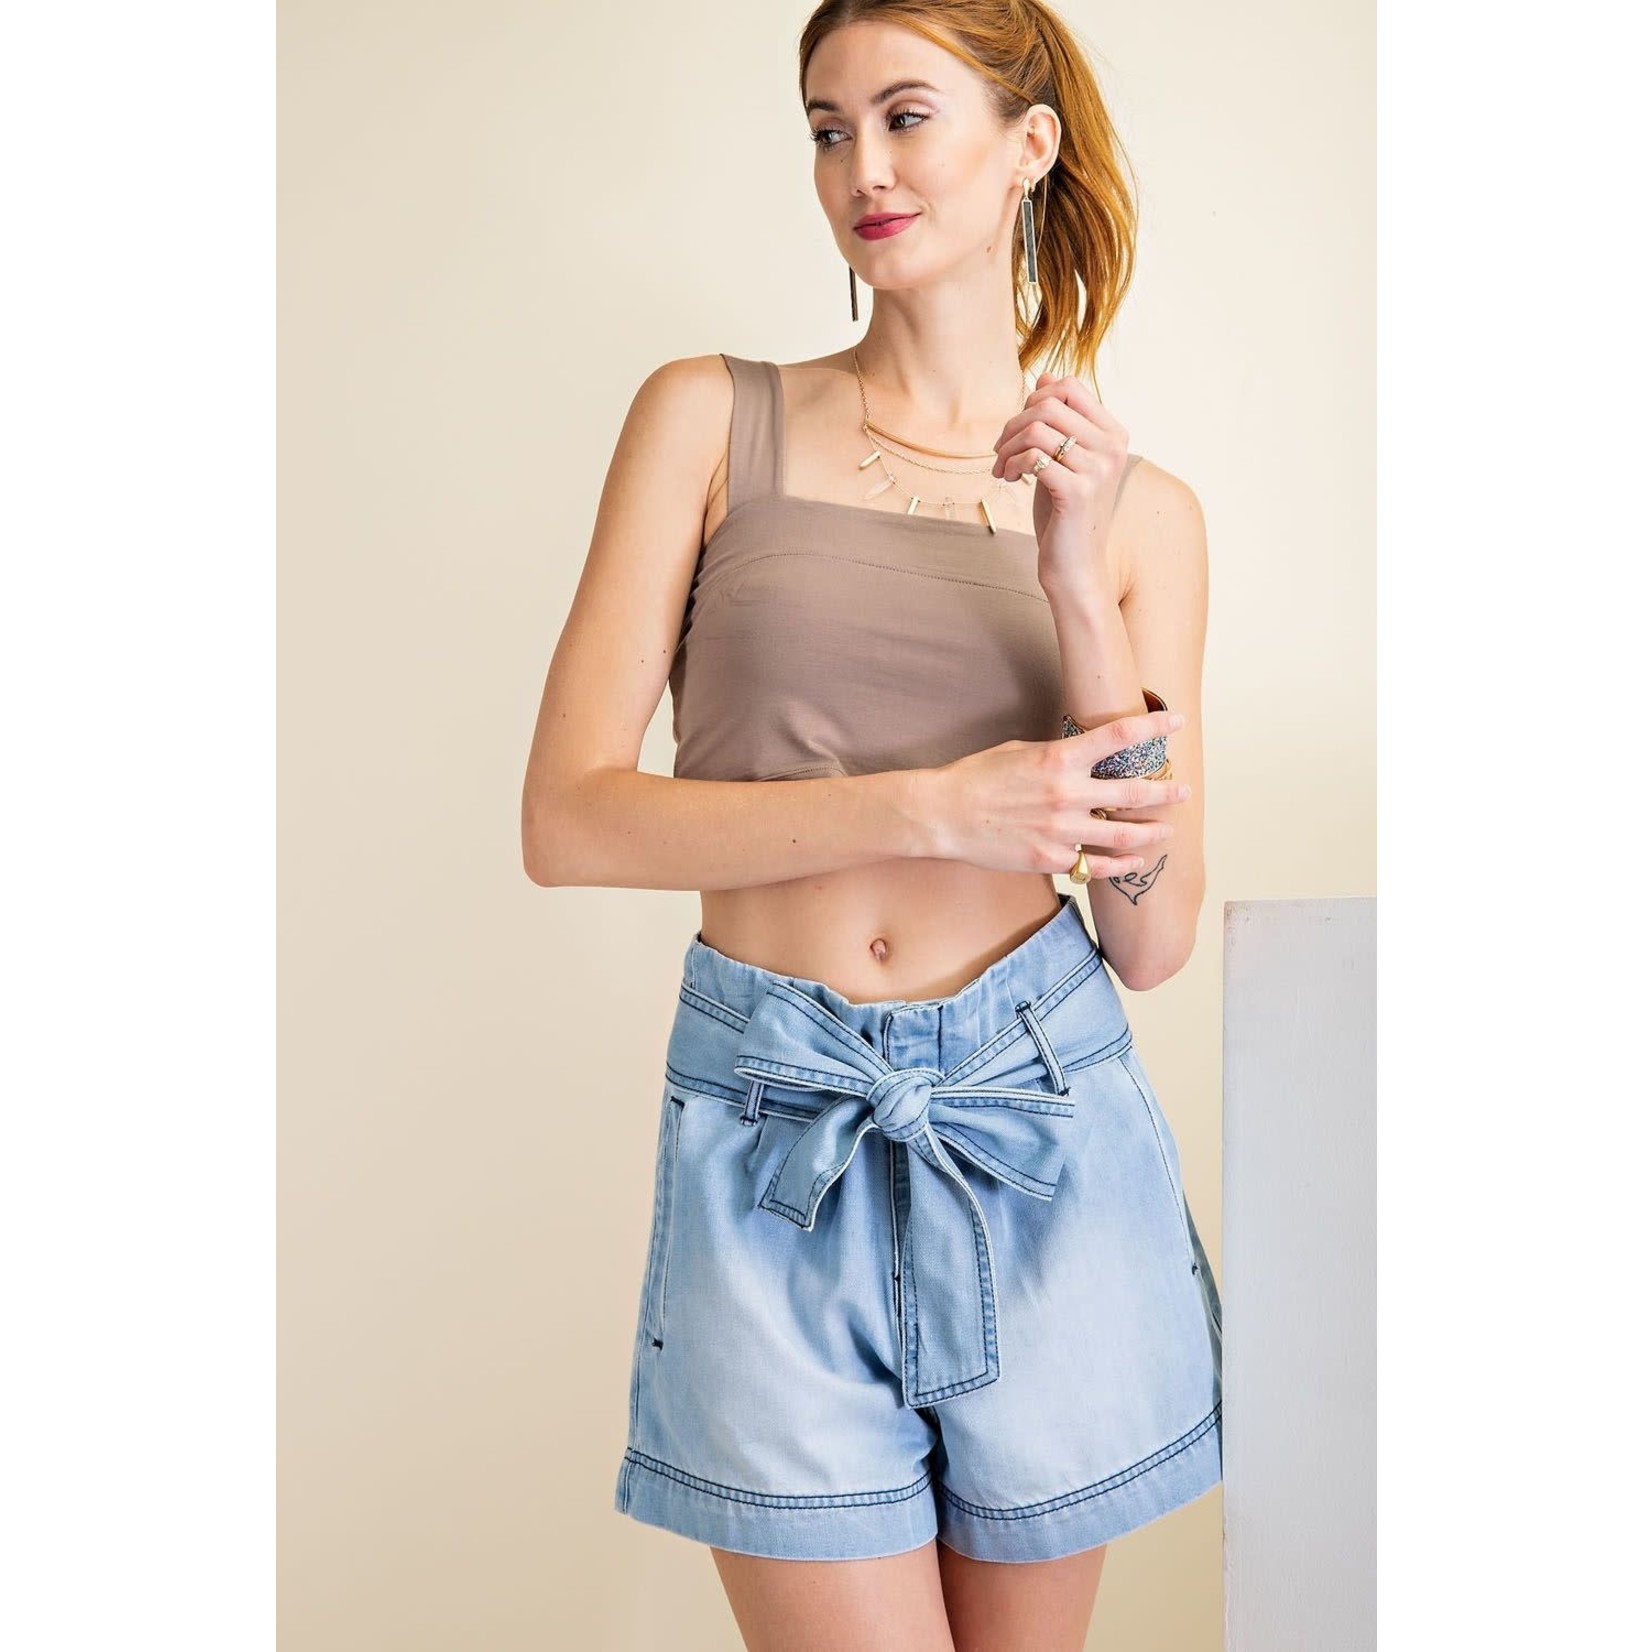 Cotton Fitted Crop Top